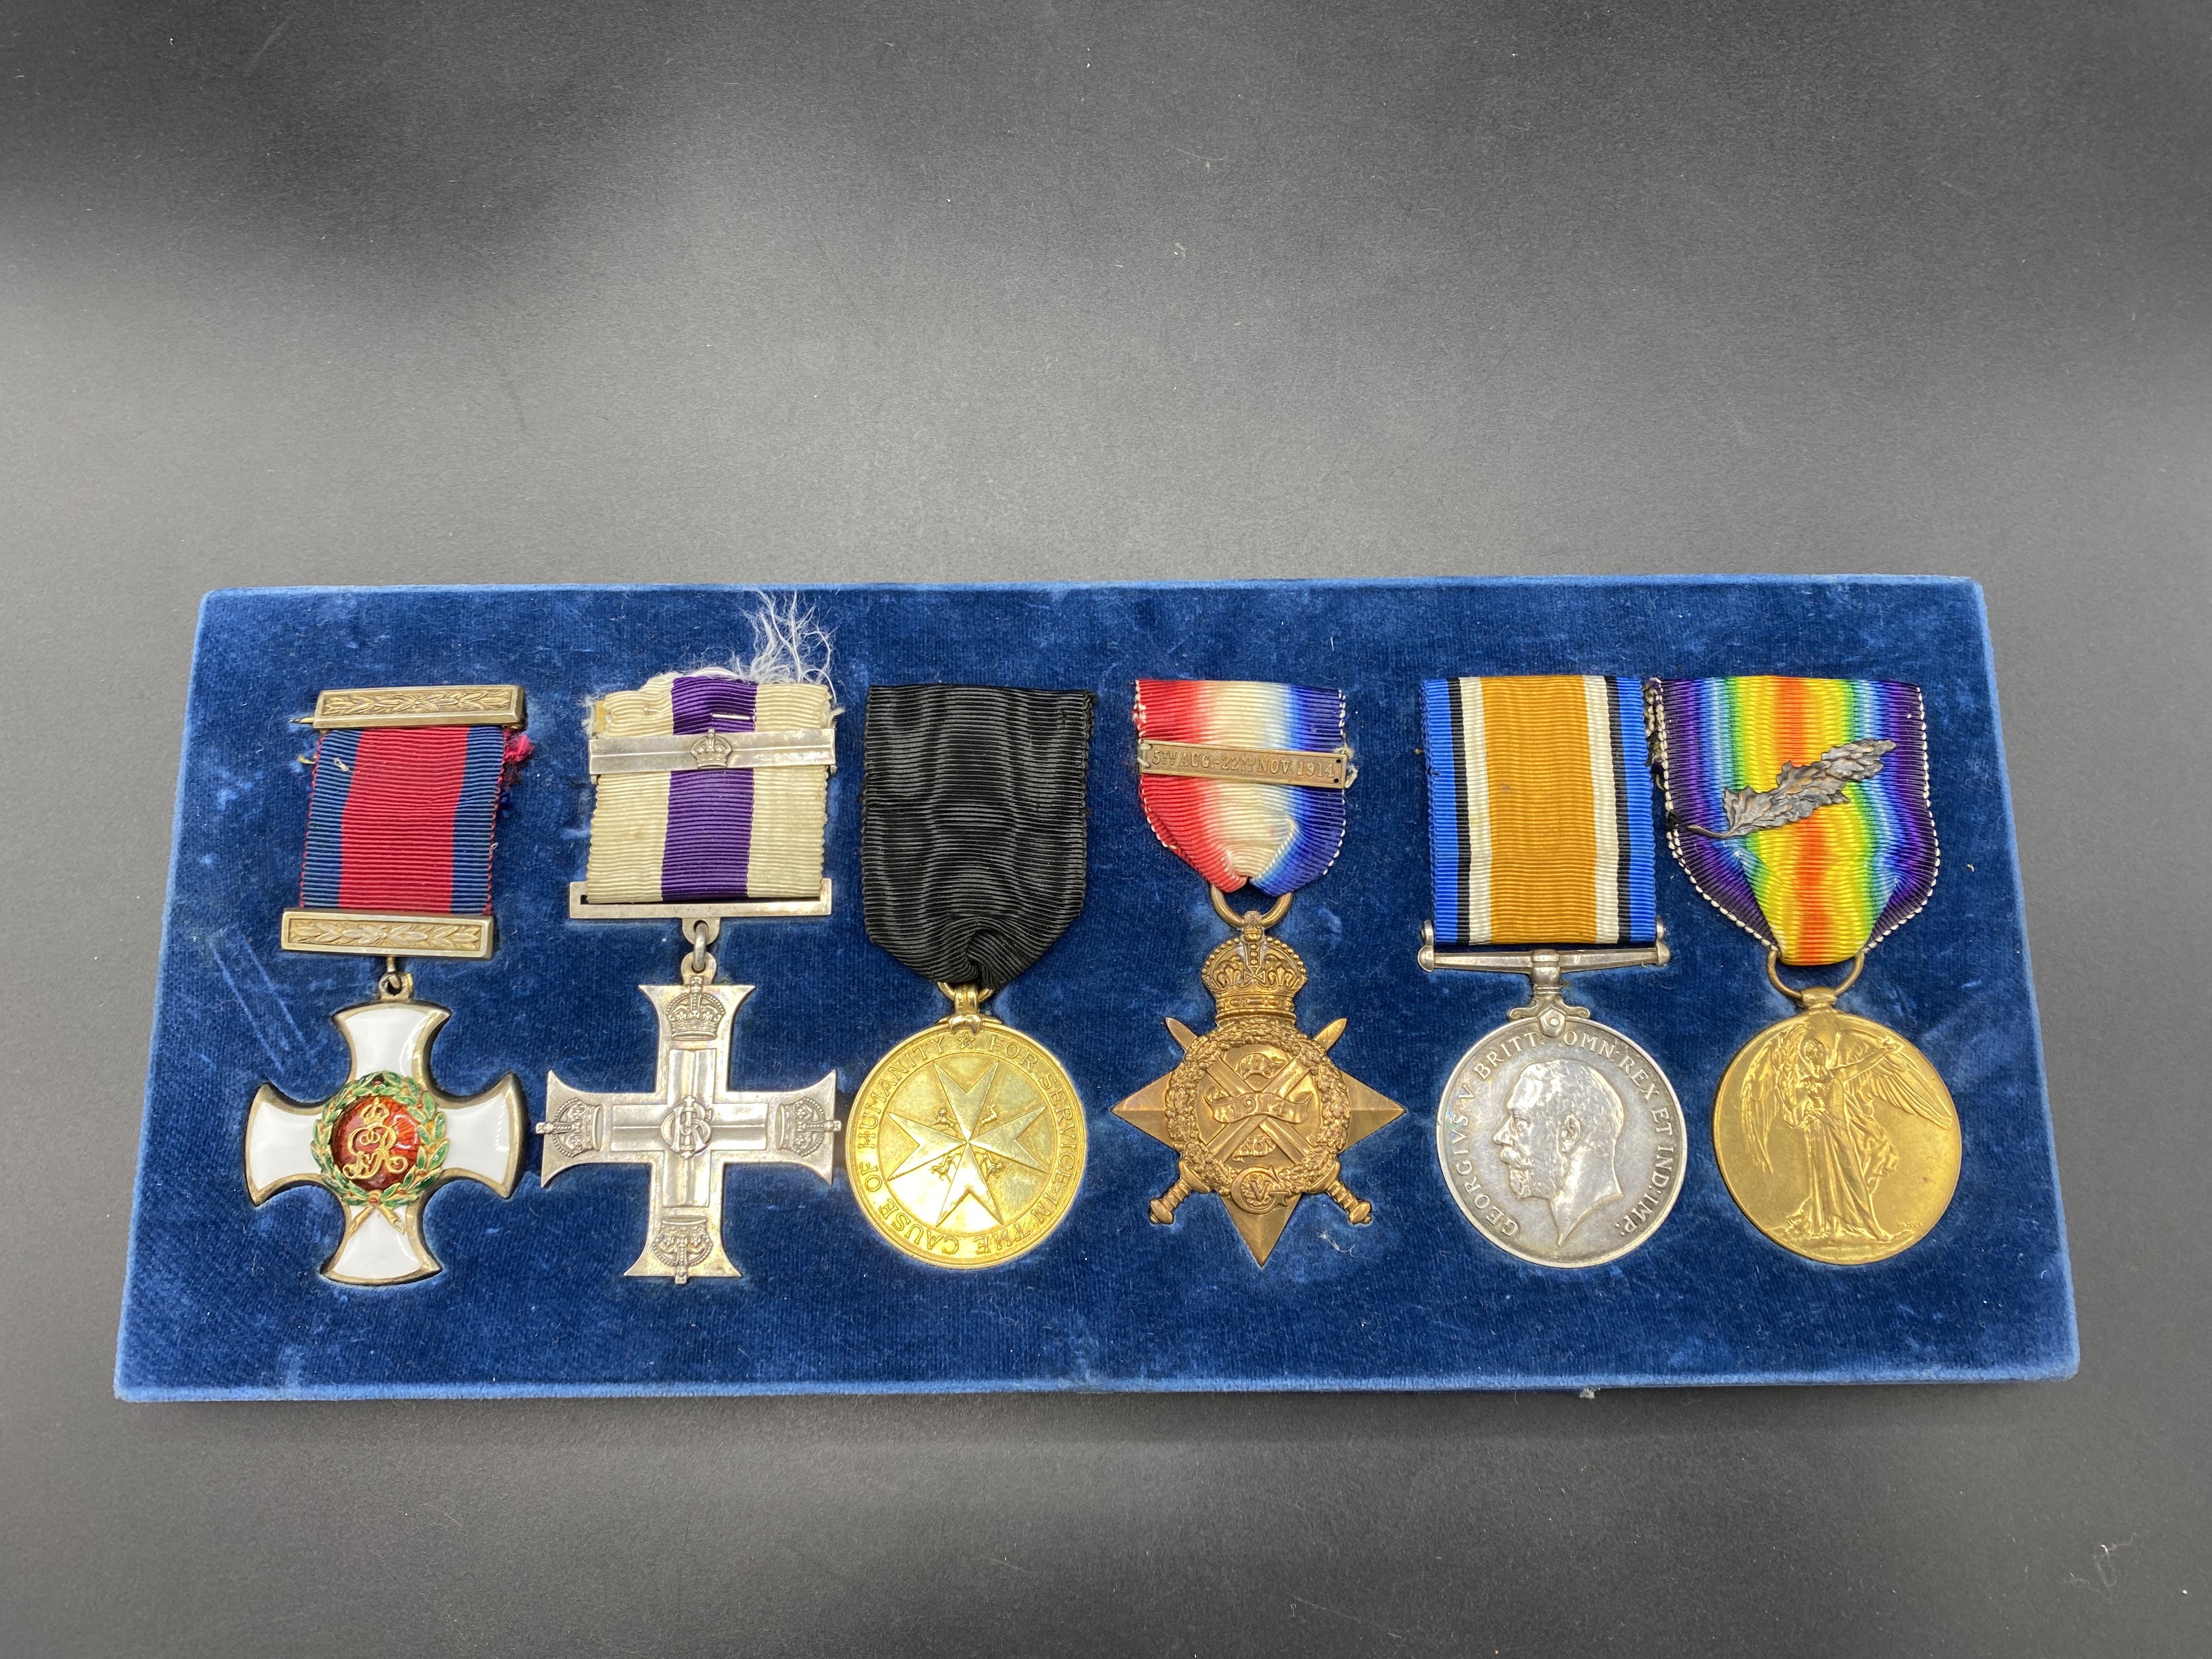 A medal presentation case containing six medals